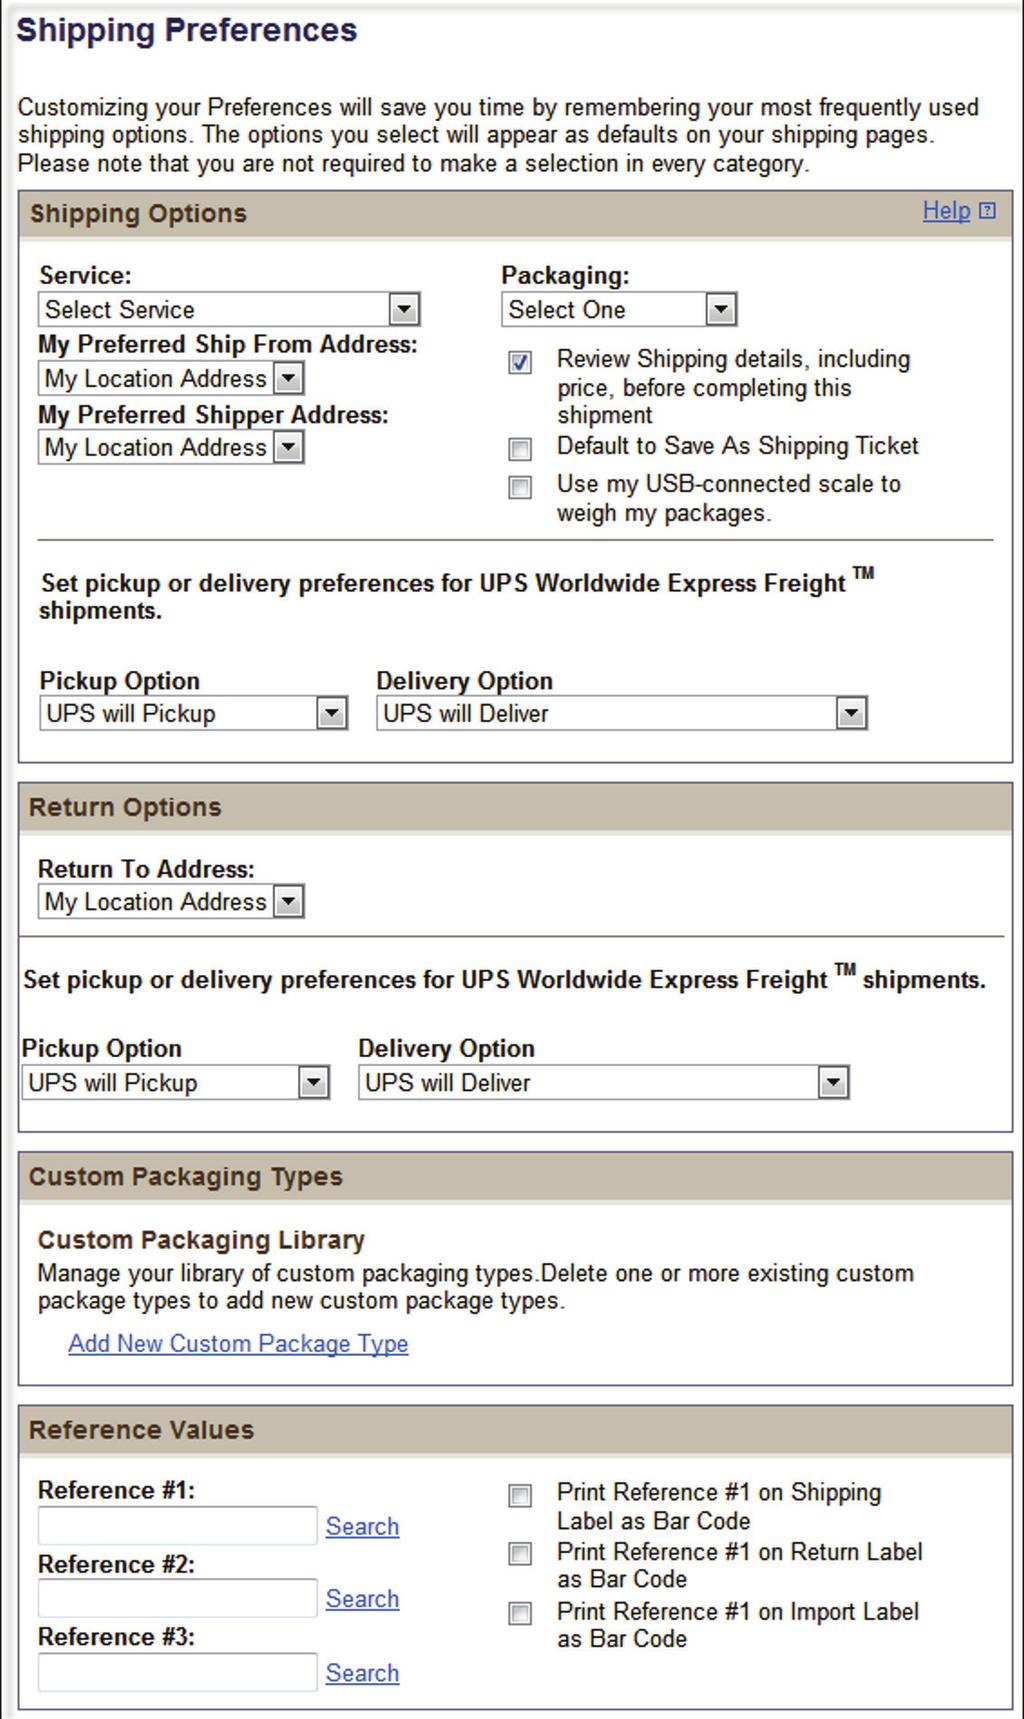 My settings Begin by setting your Shipping Preferences which saves time and ensures a tailored shipping experience.